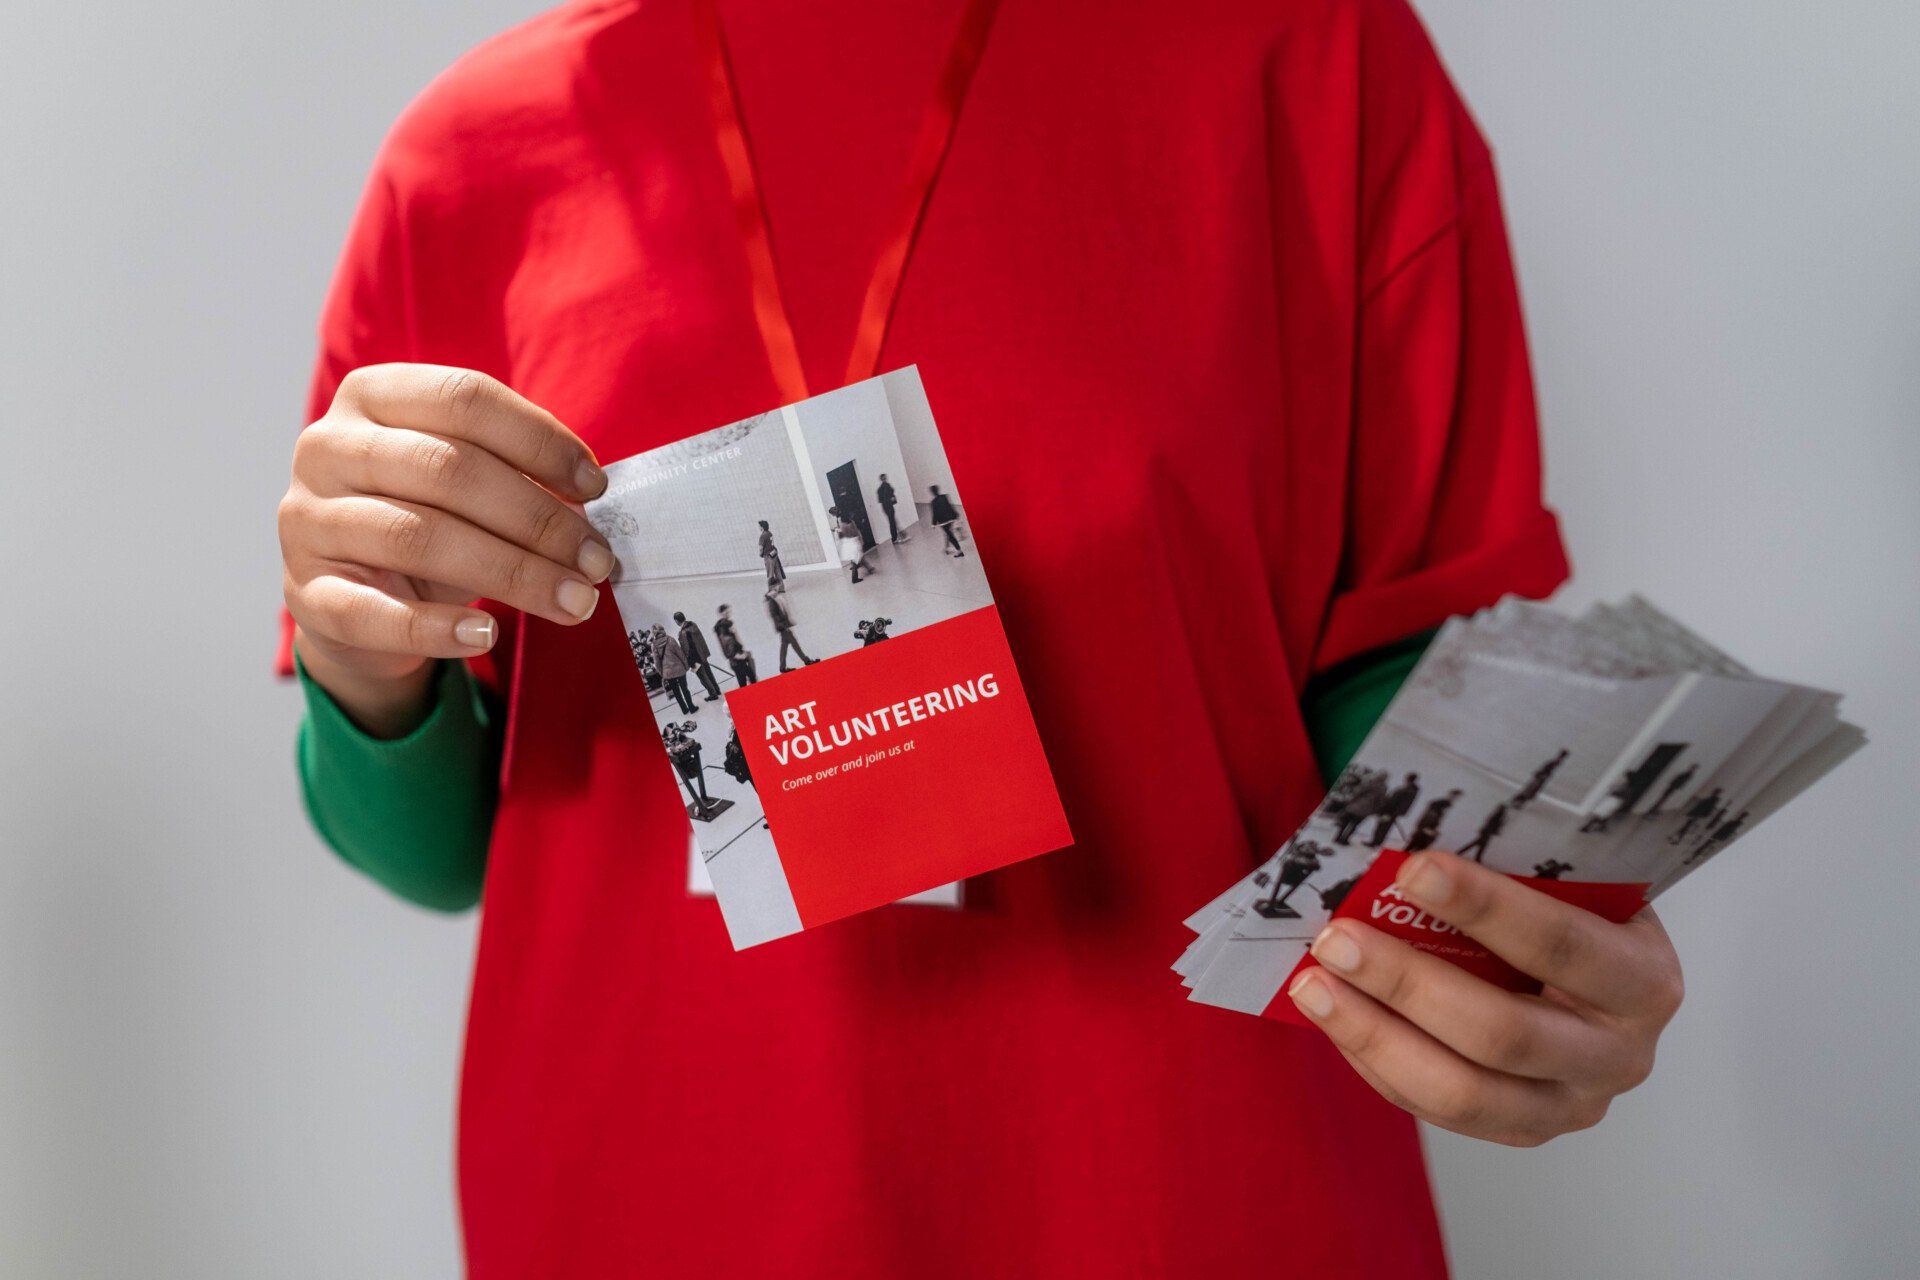 a person in a red shirt is holding a brochure in their hands .